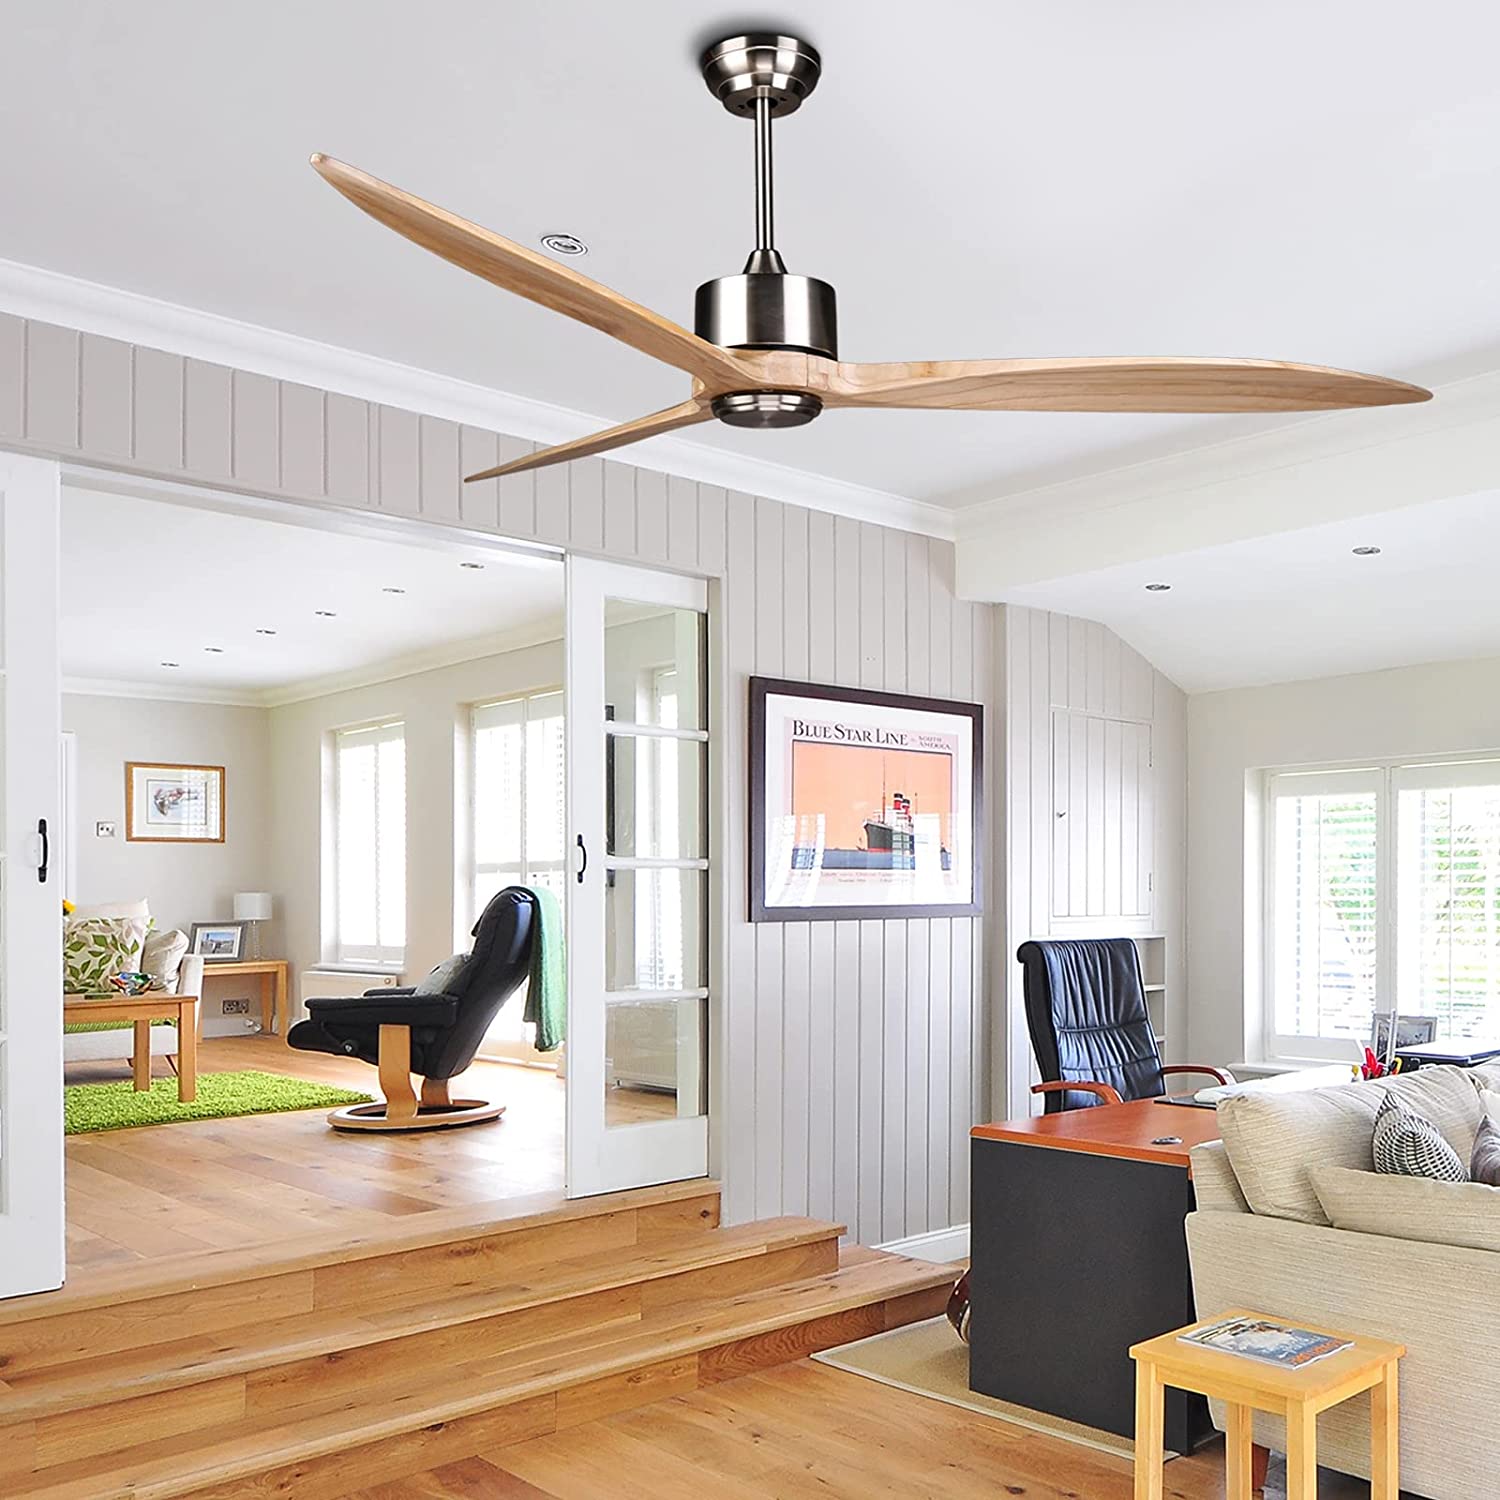 Safety concerns when using a ceiling fan for weight-bearing